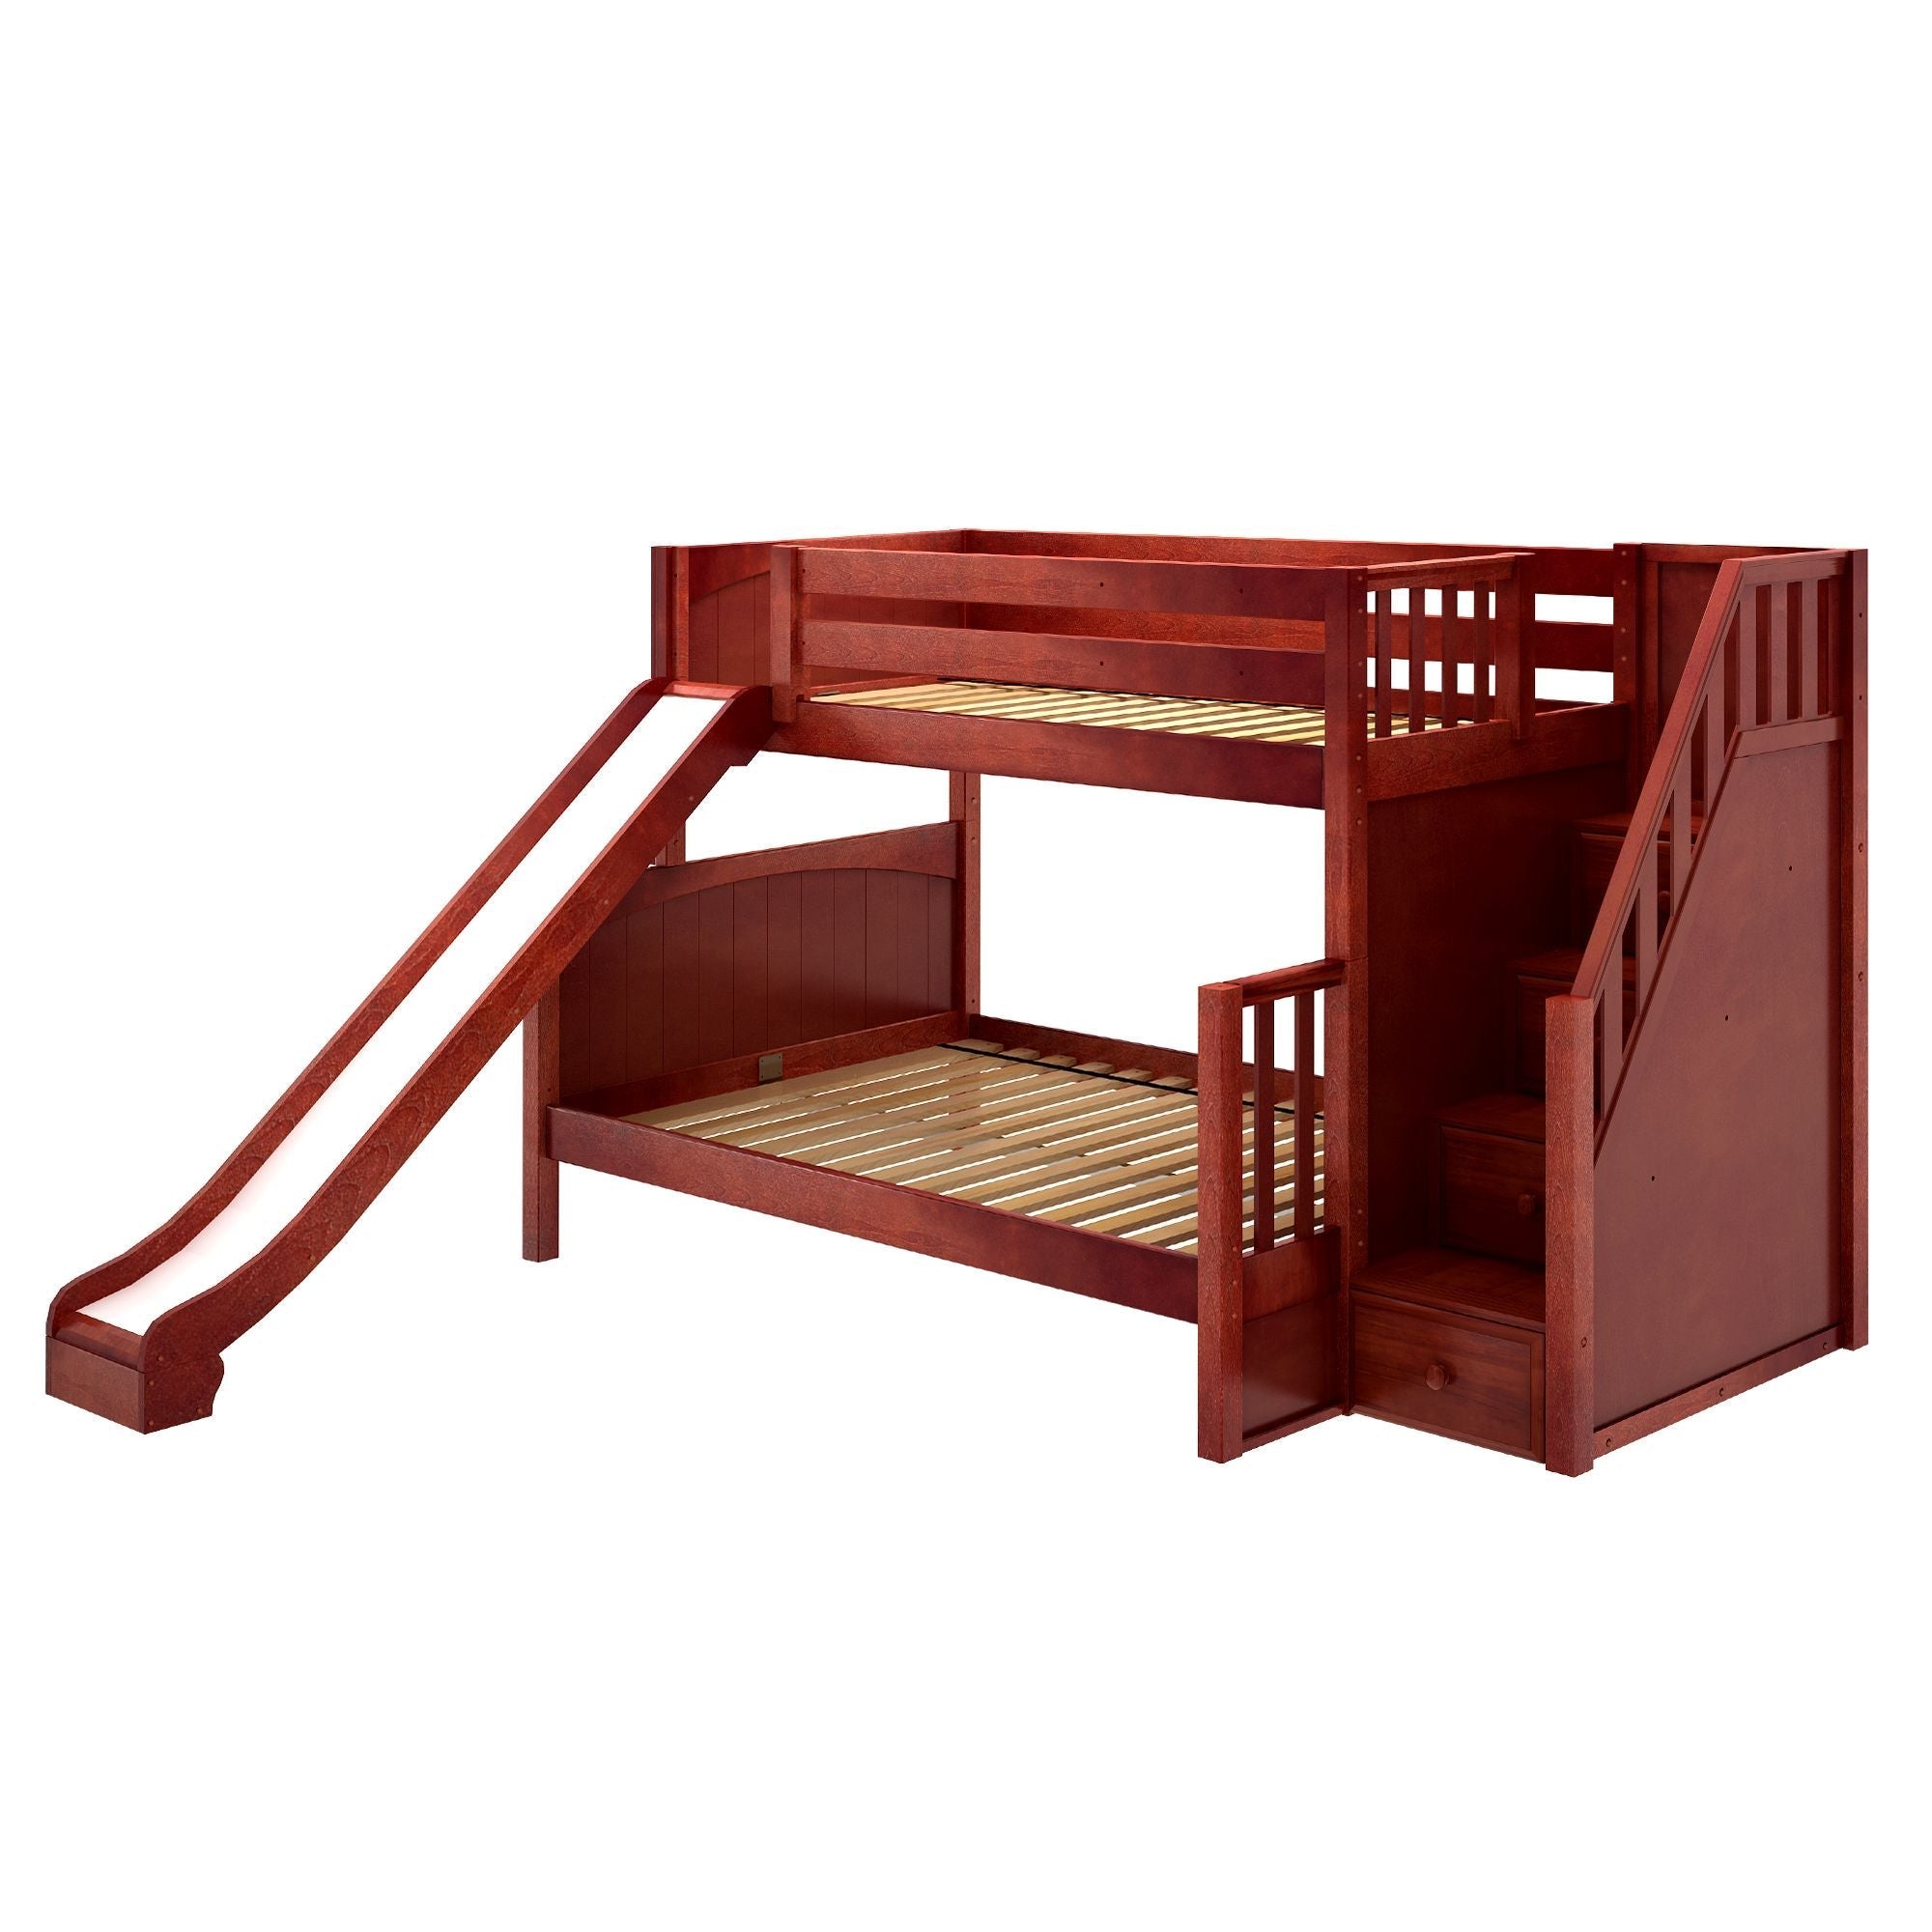 Maxtrix Twin XL over Full XL Medium Bunk Bed with Stairs and Slide